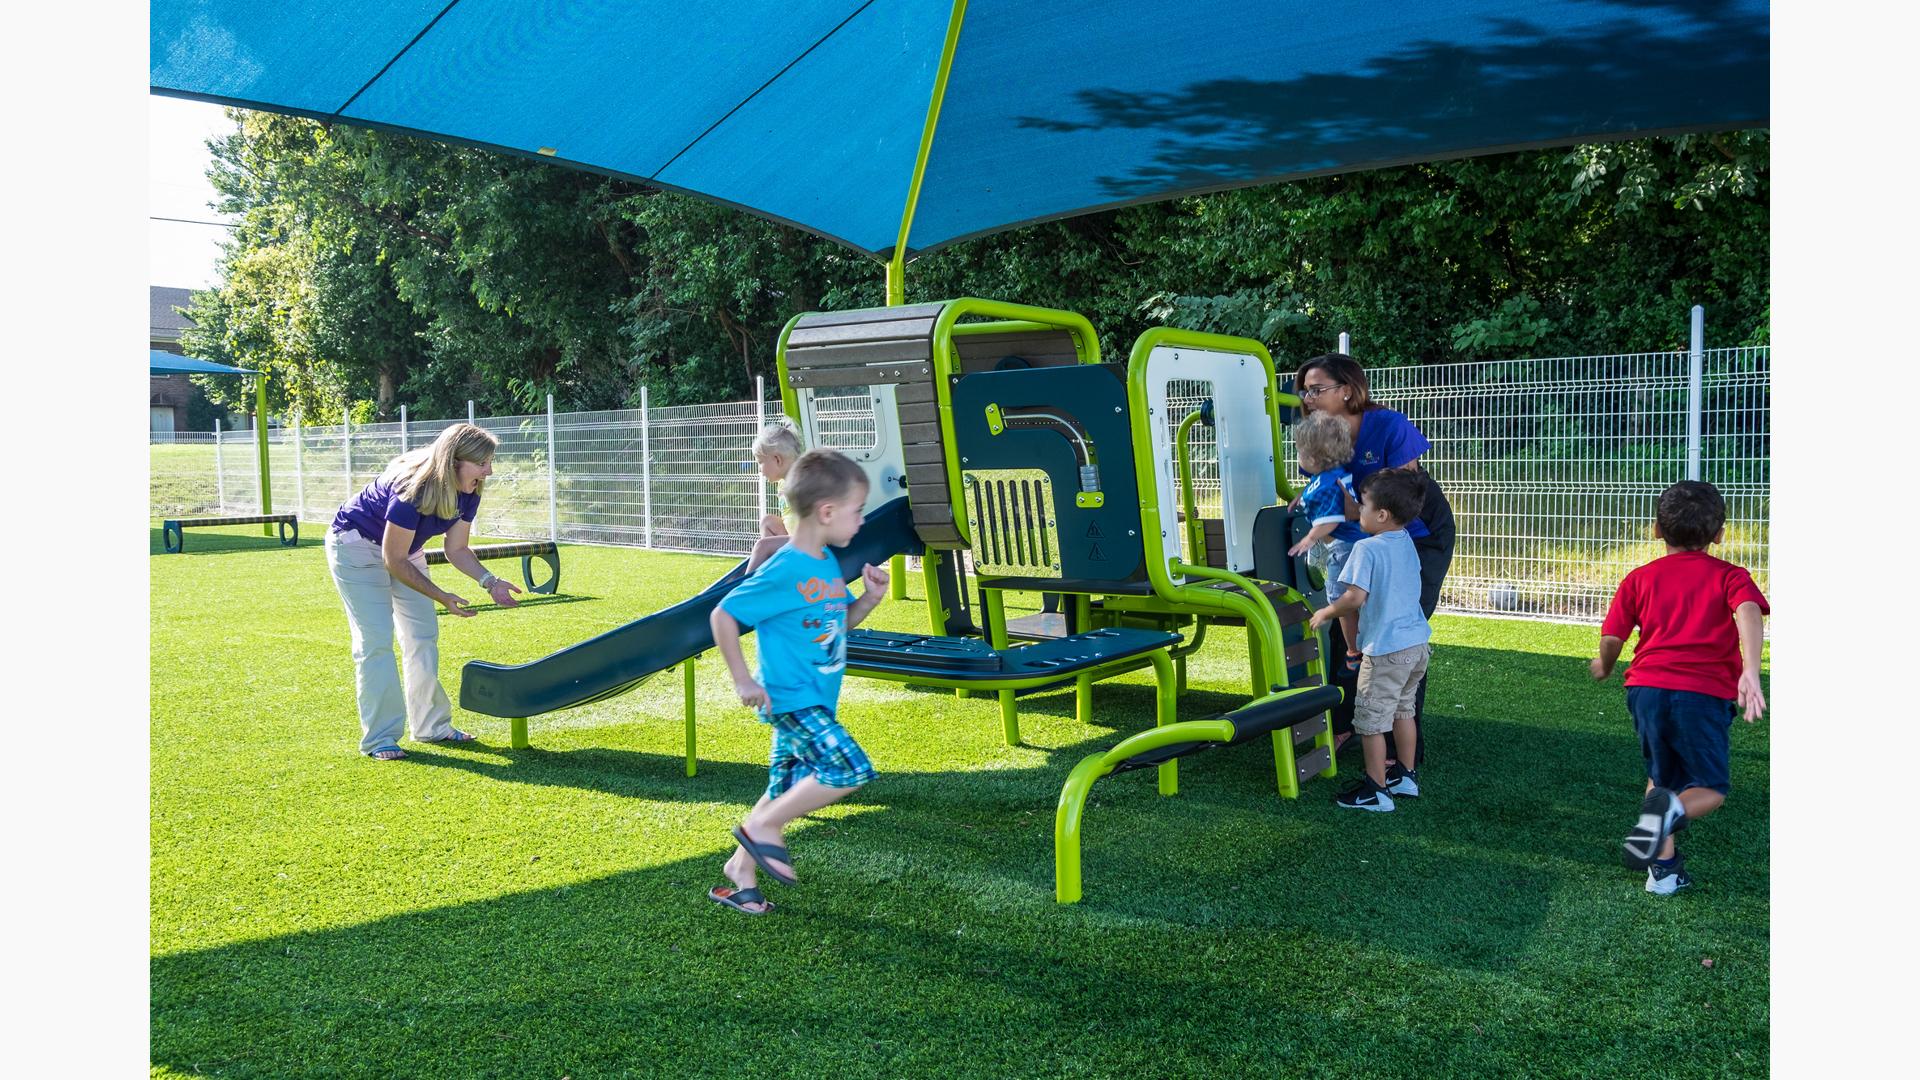 Blue & green playsmart play structure being surrounded by kids from Smart Start Childcare Center.